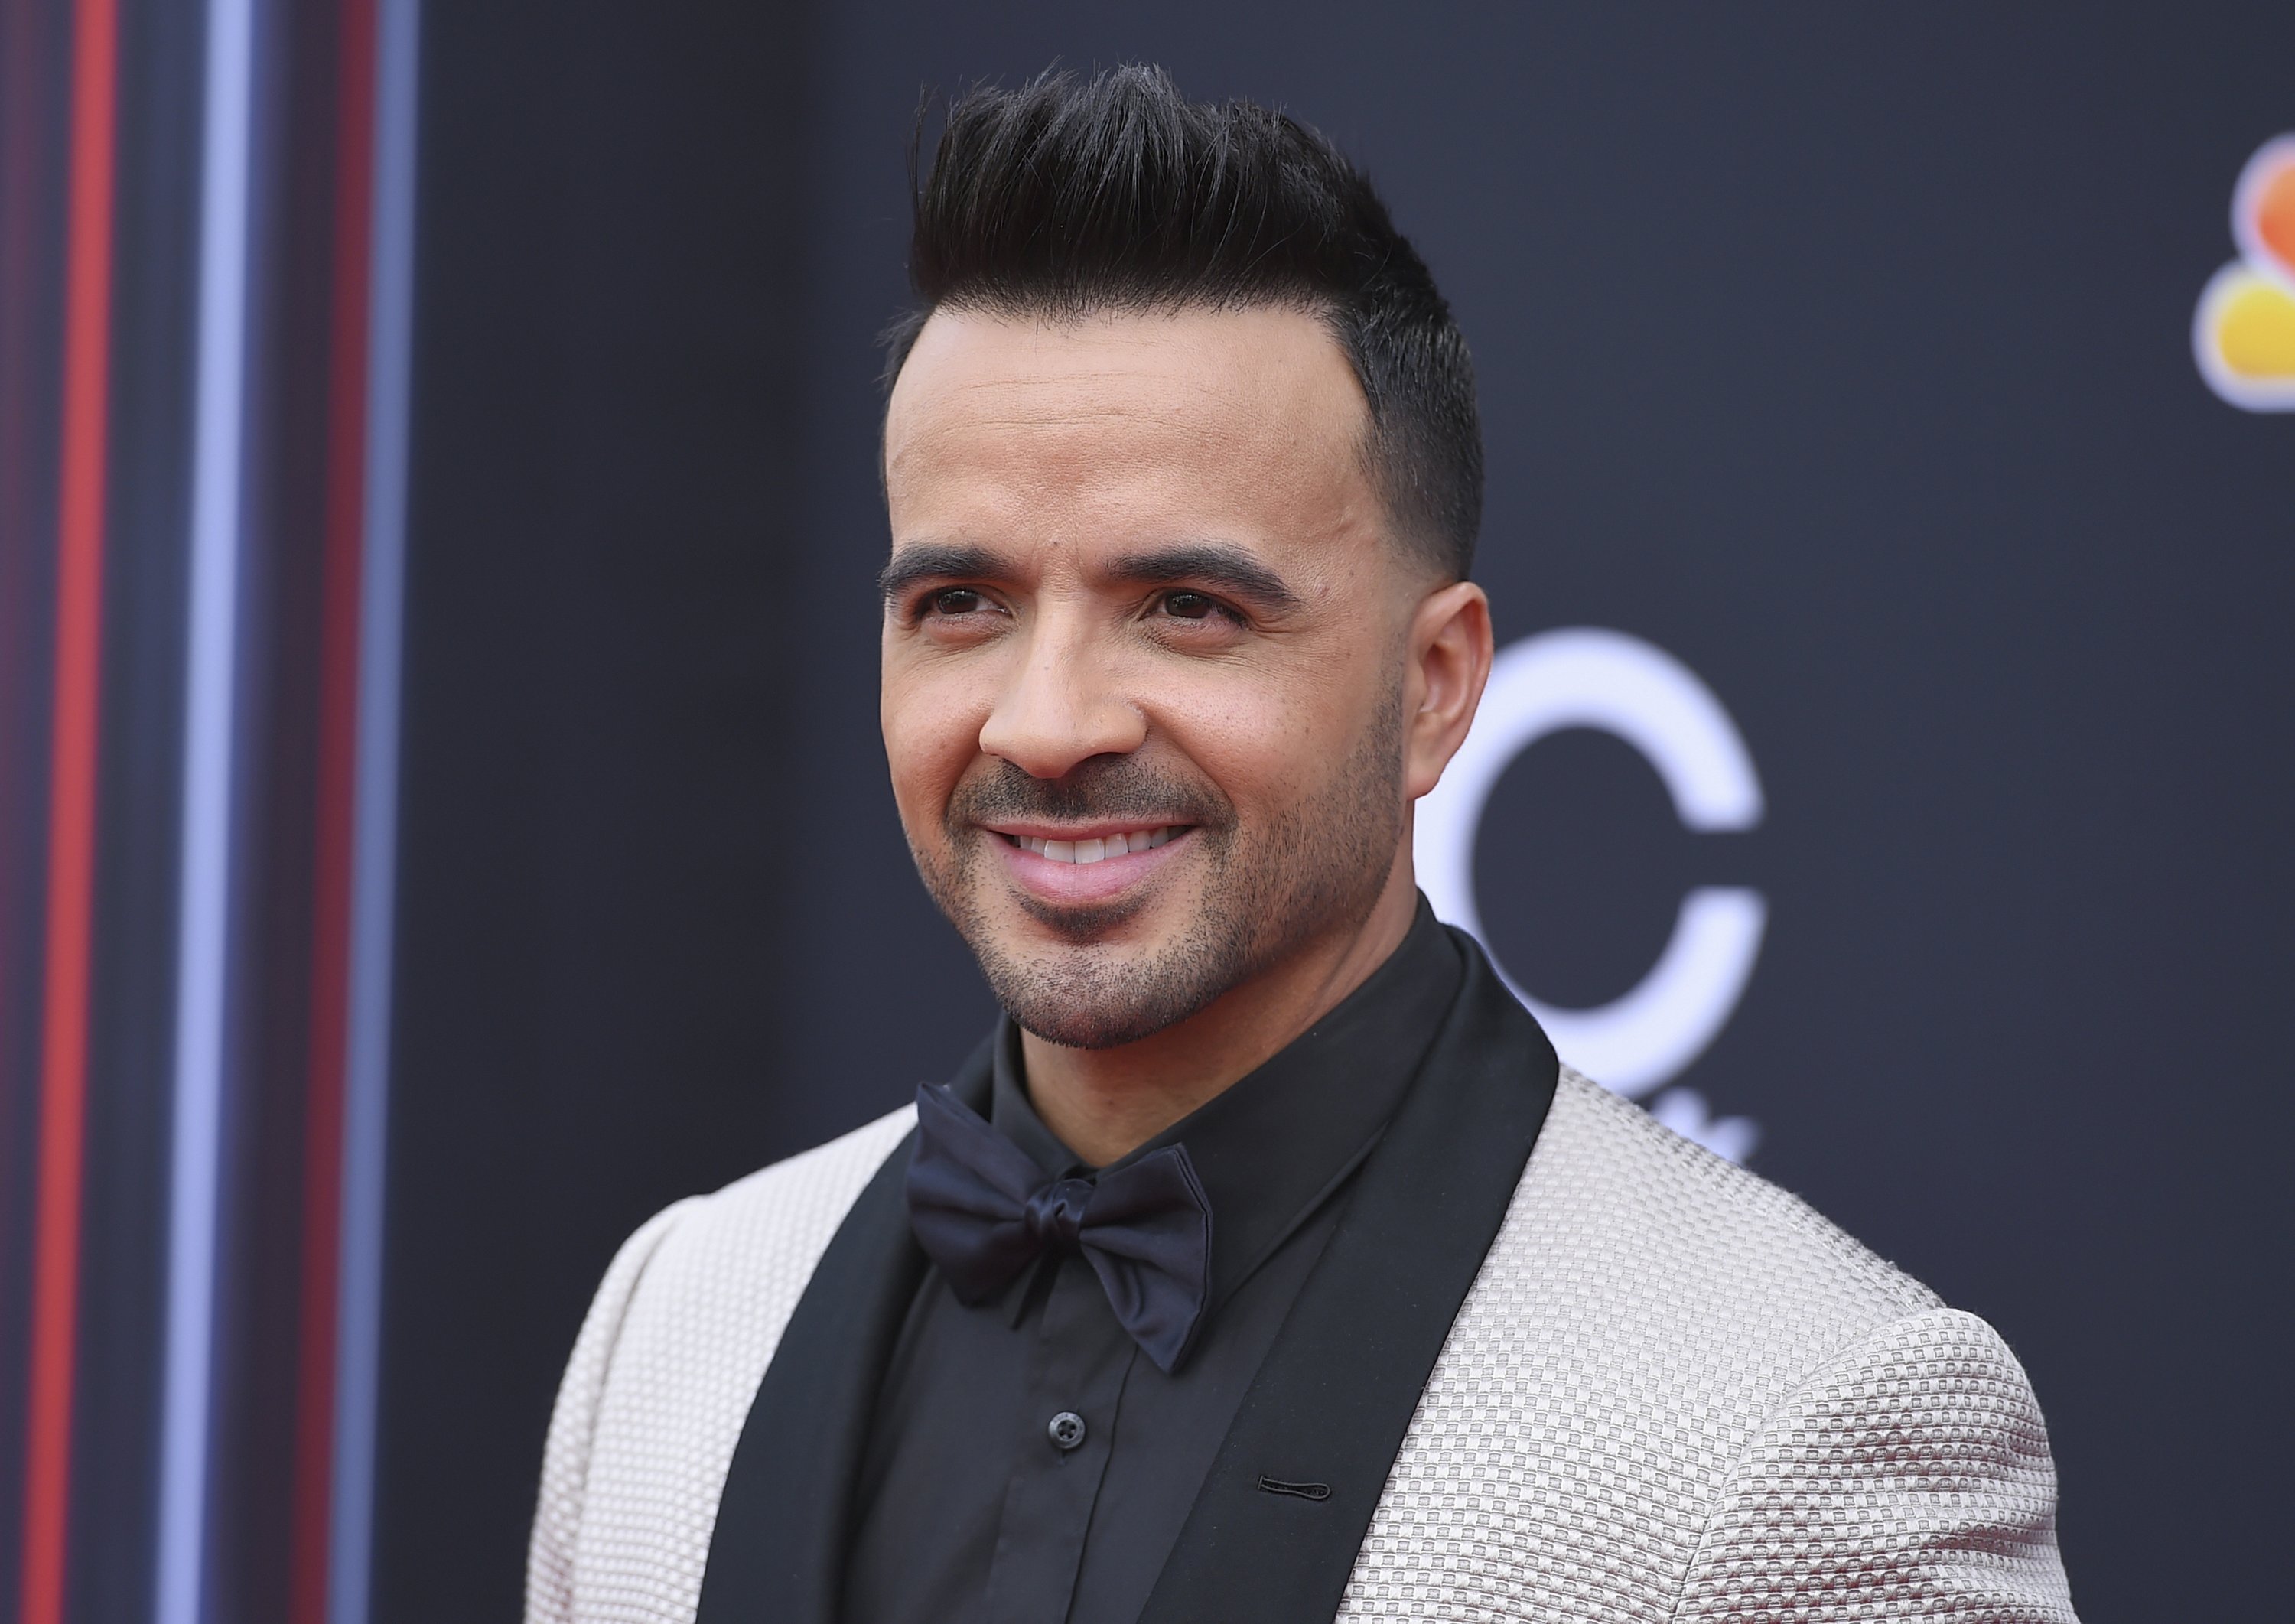 Slowly) is a song by puerto rican singer luis fonsi featuring puerto rican ...